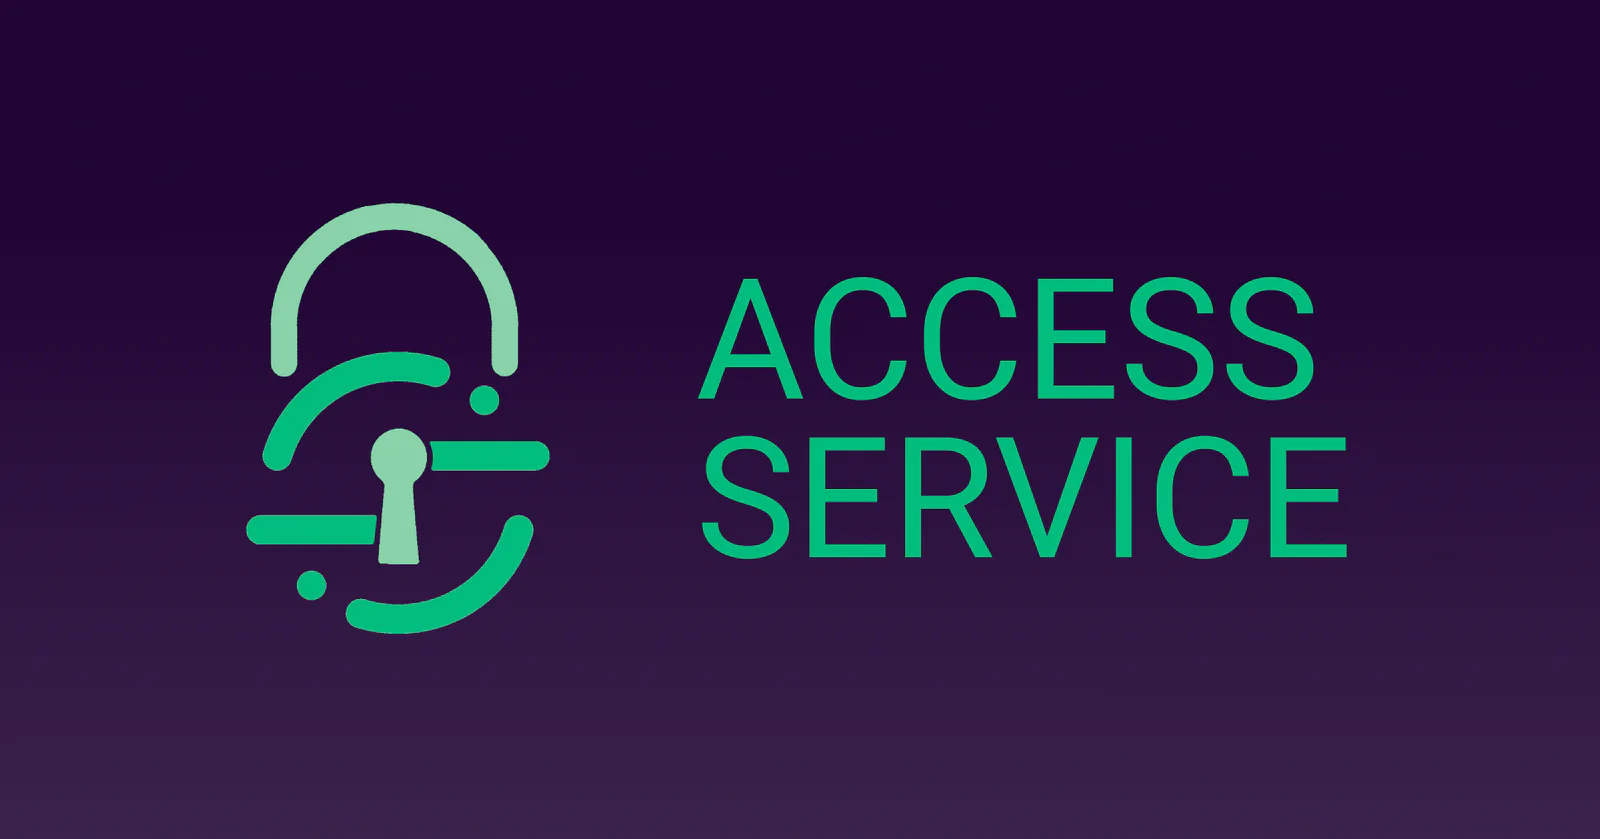 Access Service: Temporary Access to the Cloud